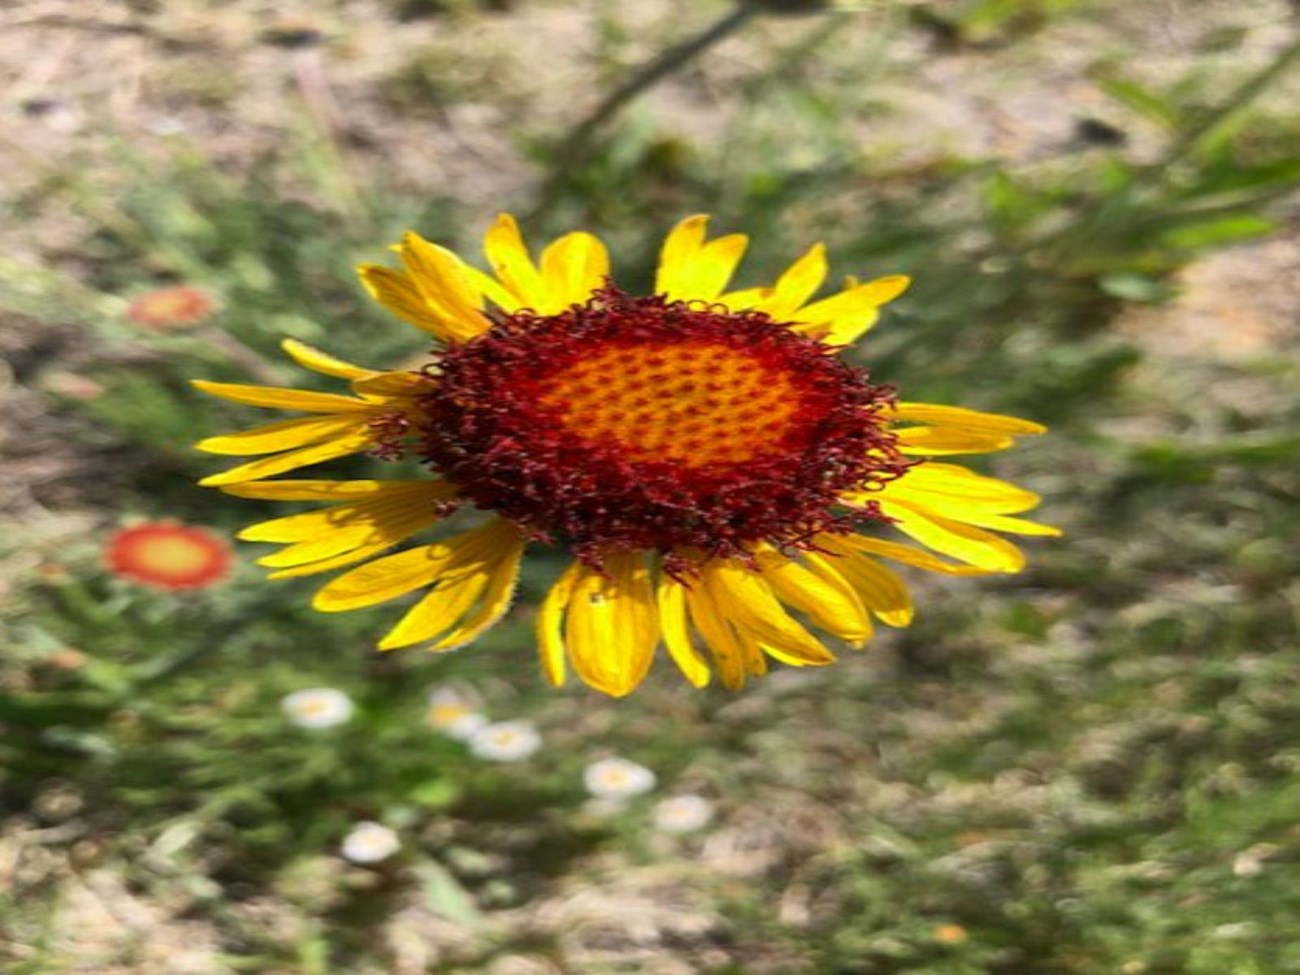 A Red Dome Gallardia with yellow petals and a brown center